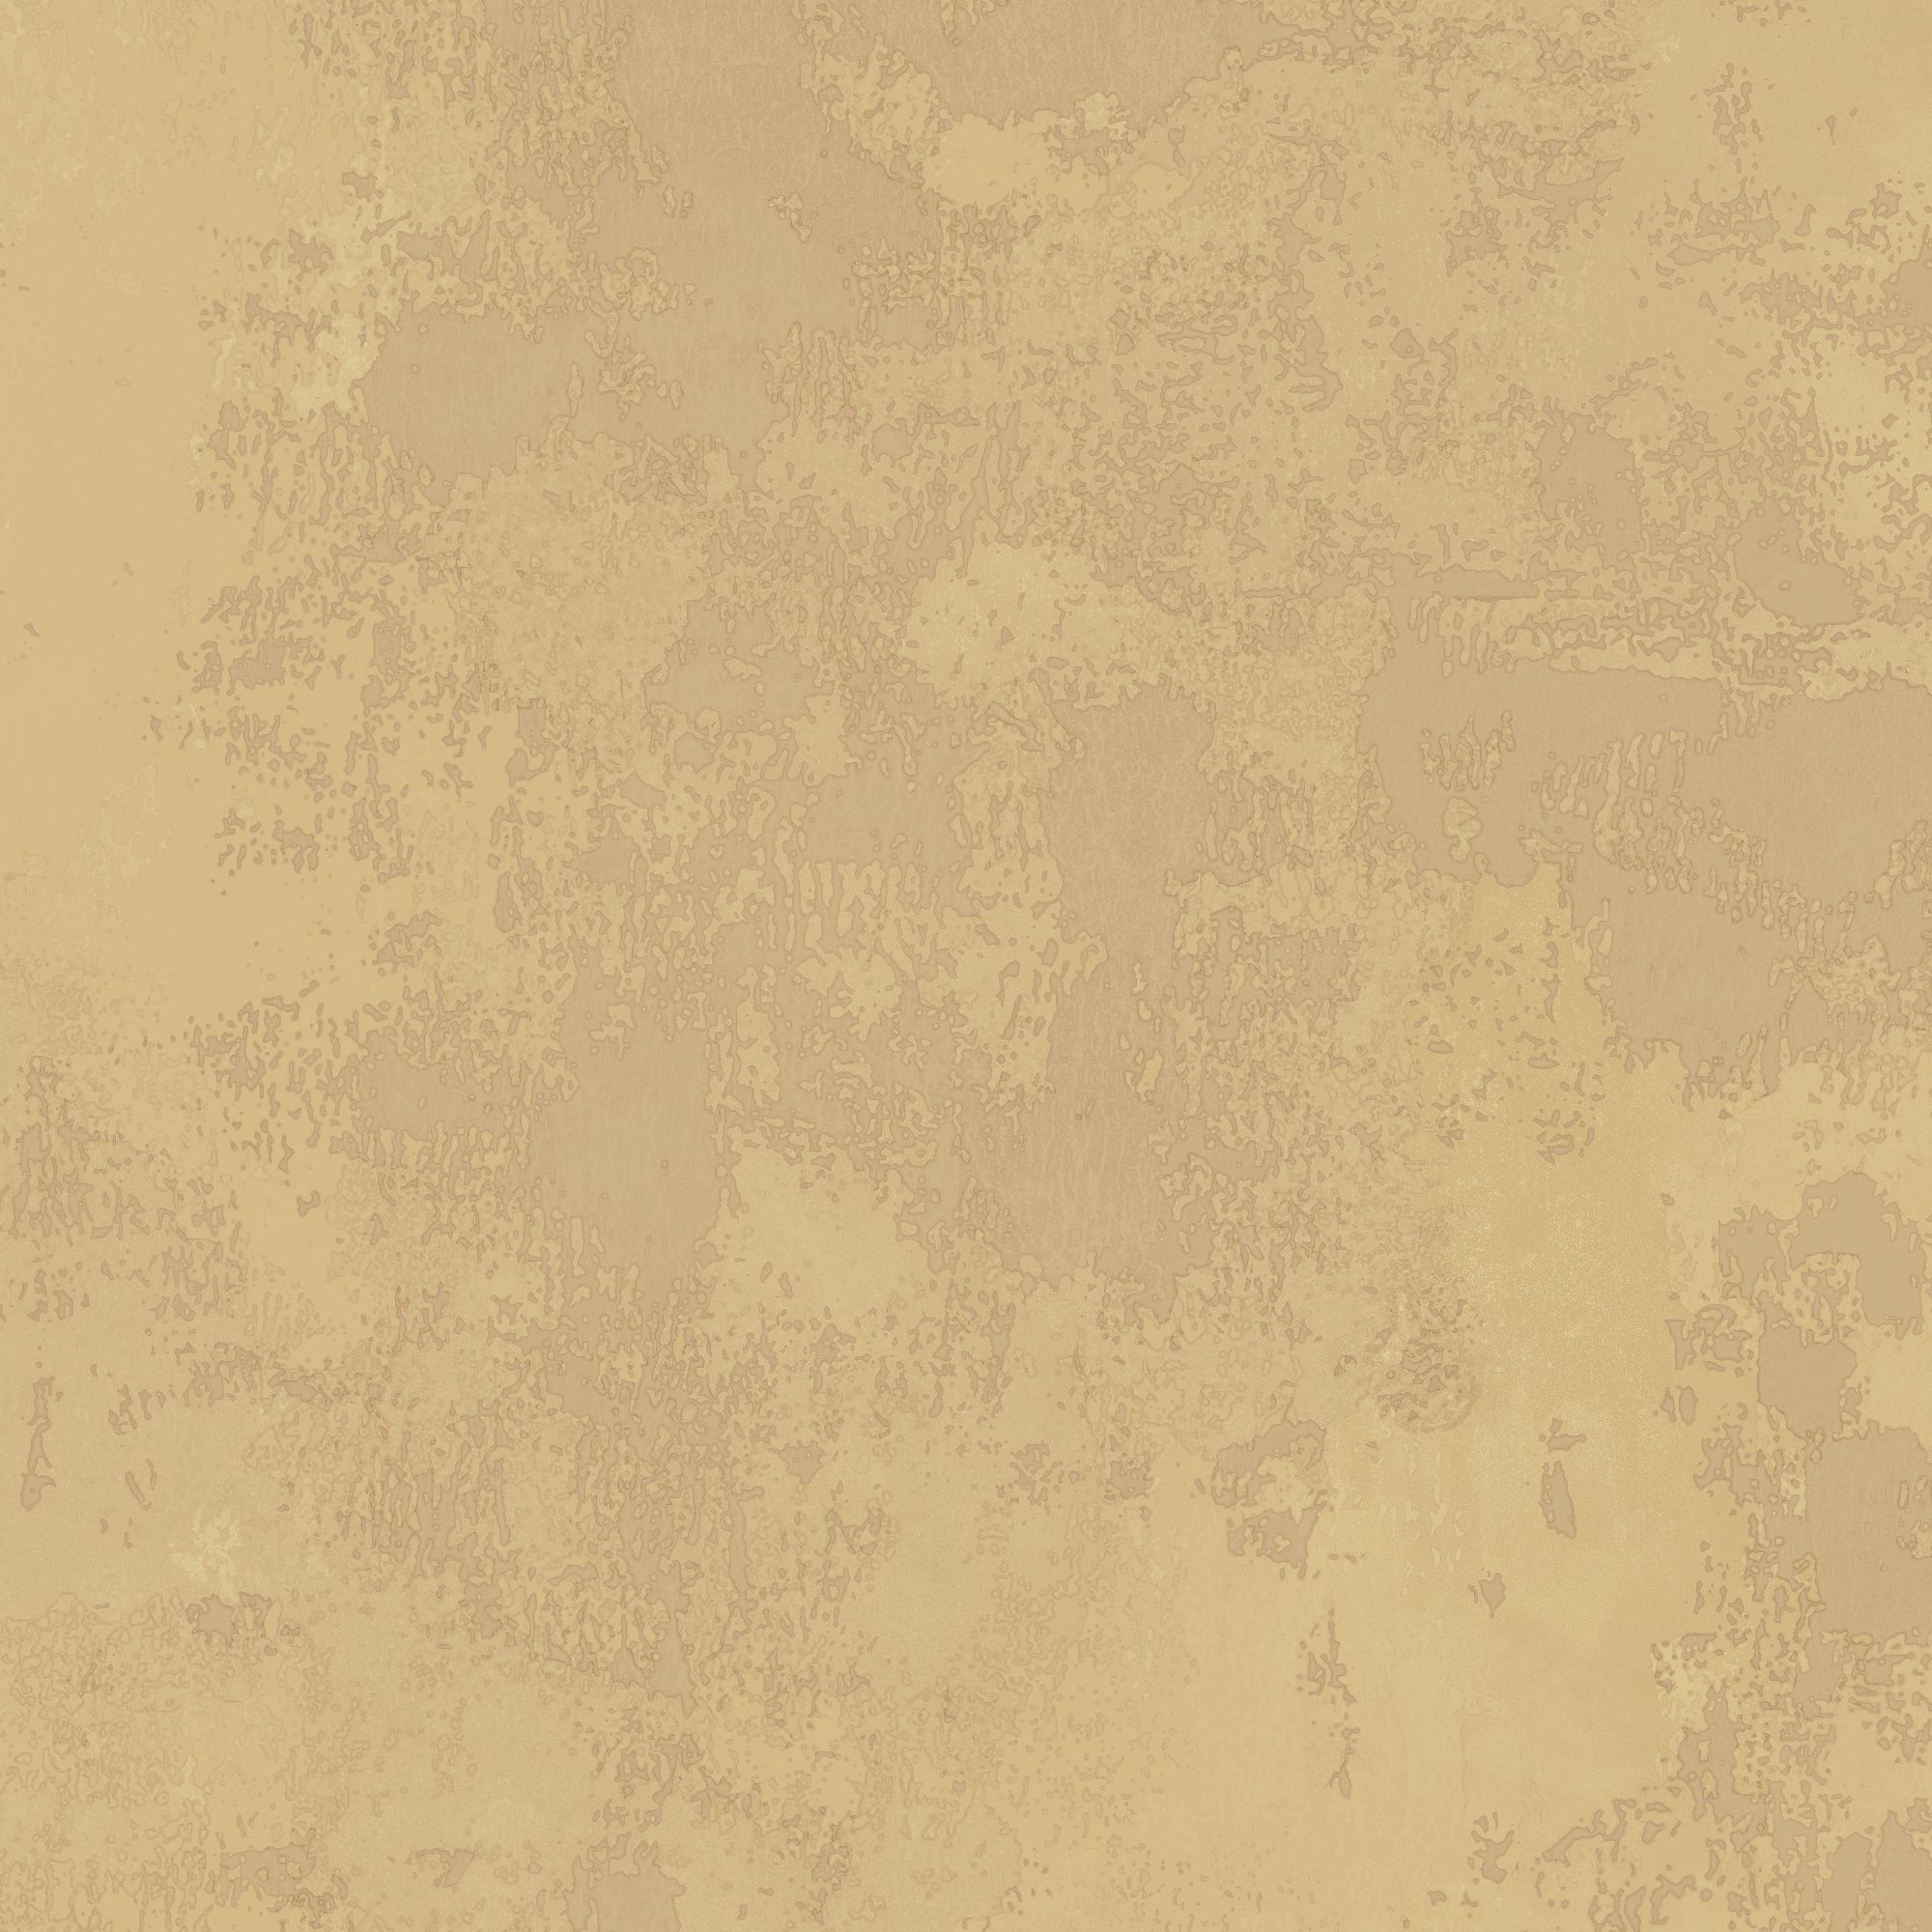 GoodHome Omey Yellow Distressed effect Textured Wallpaper